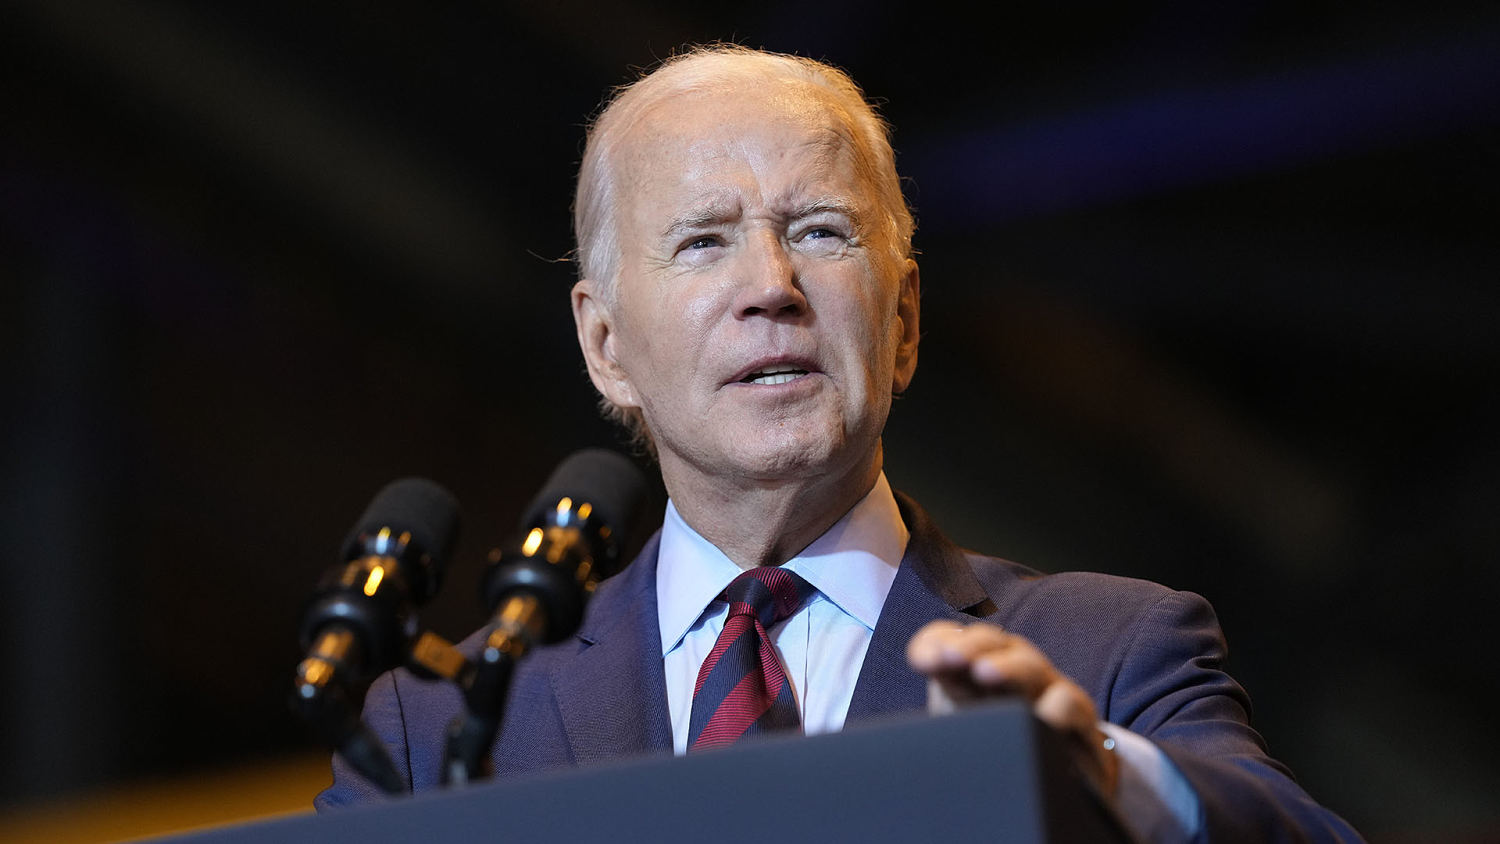 Biden delivers remarks to electrical union workers